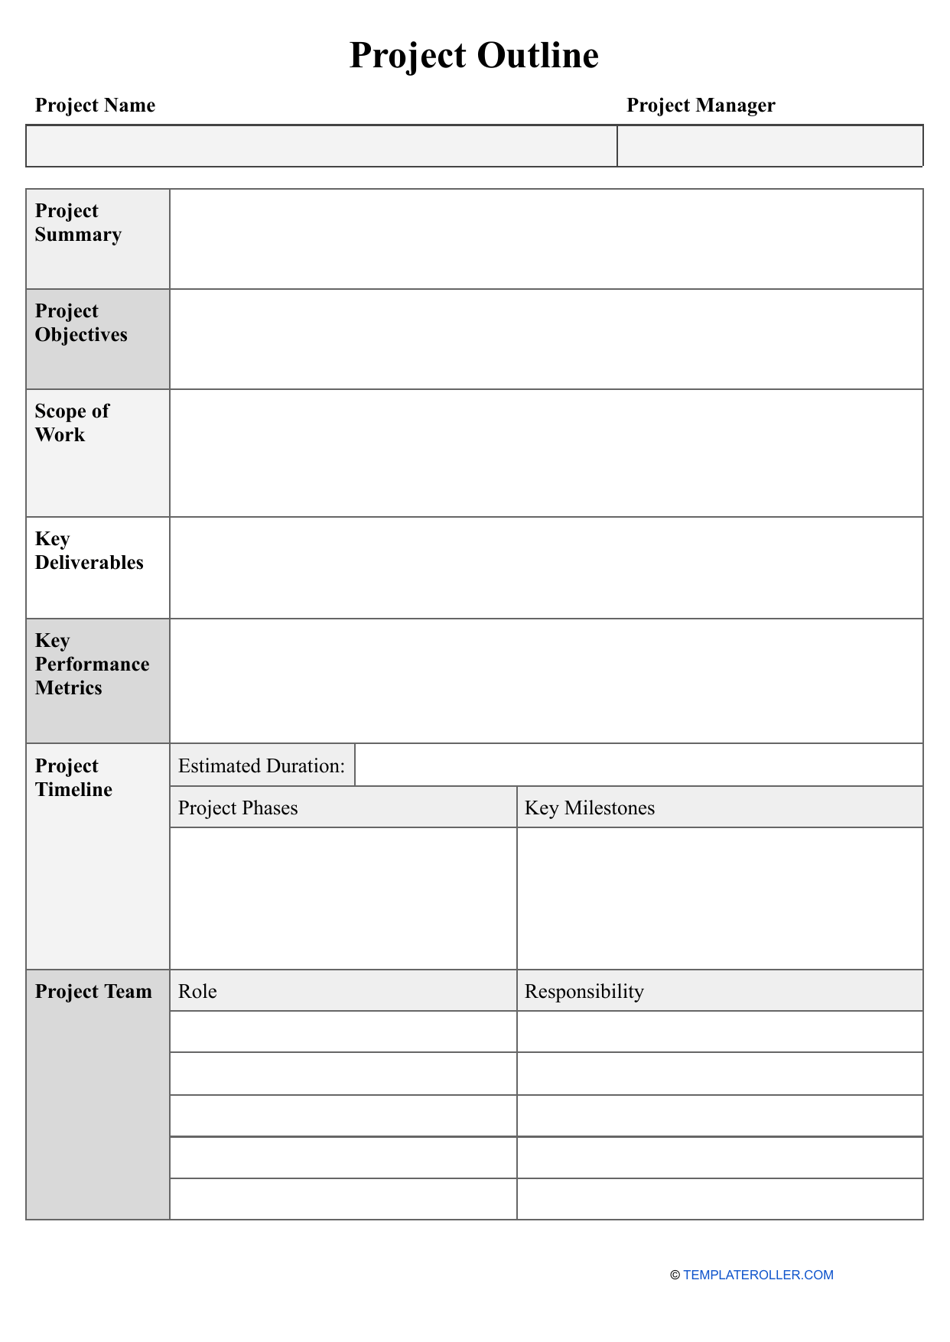 Project Outline Template - A comprehensive document to outline your project's objectives, activities, and timelines.